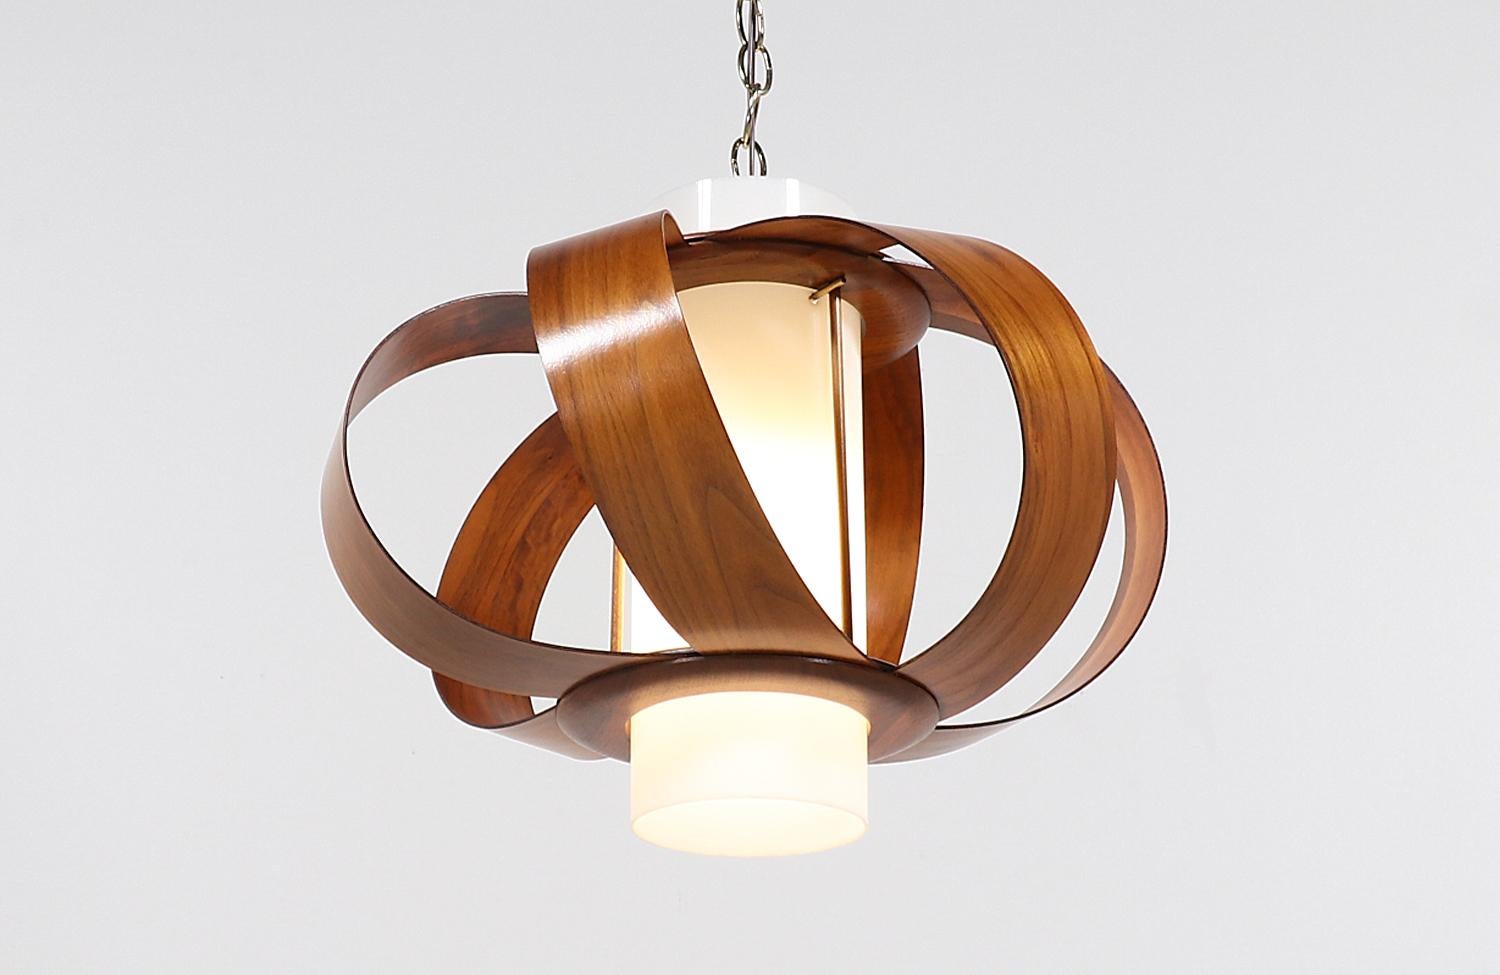 Dazzling Mid-Century Modern sculpted chandelier designed and manufactured circa 1960s. This rare and delicate chandelier features walnut bentwood leaves, creating a spherical effect around the original cylindrical glass shade that makes this